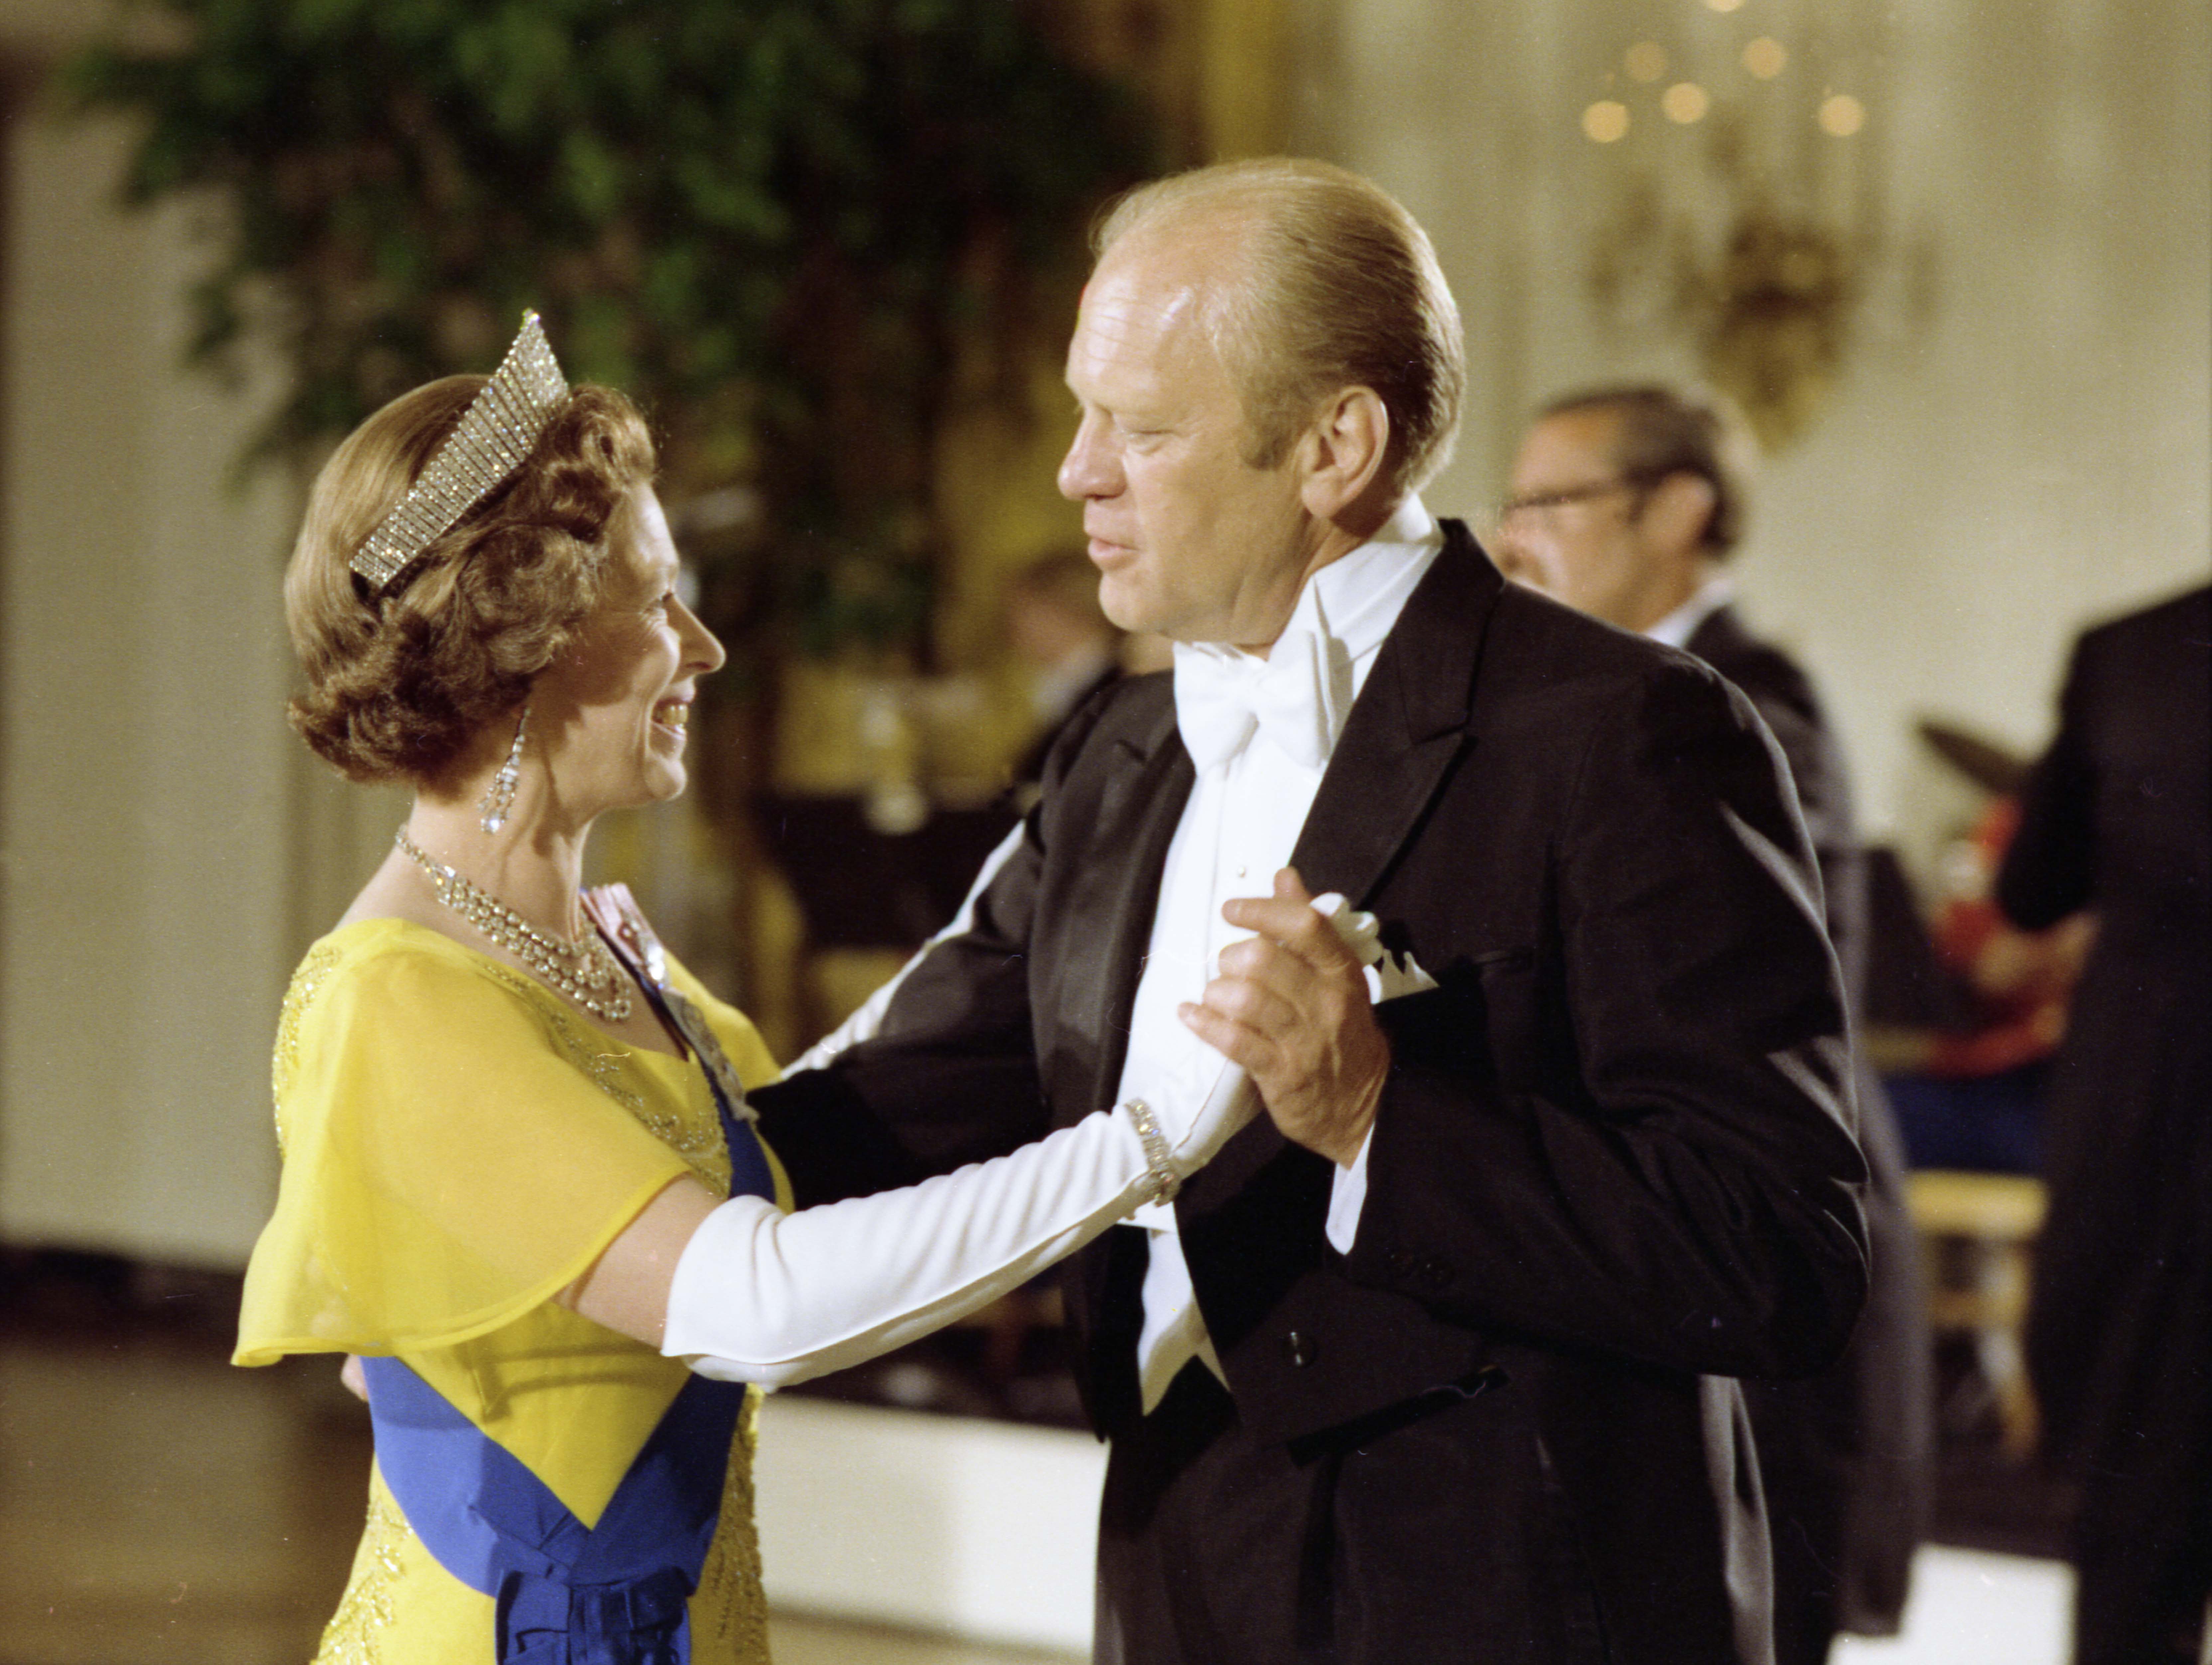 Photograph of President Gerald Ford Dancing with Queen Elizabeth II during a State Dinner Held in Her Honor, 7/7/1976.